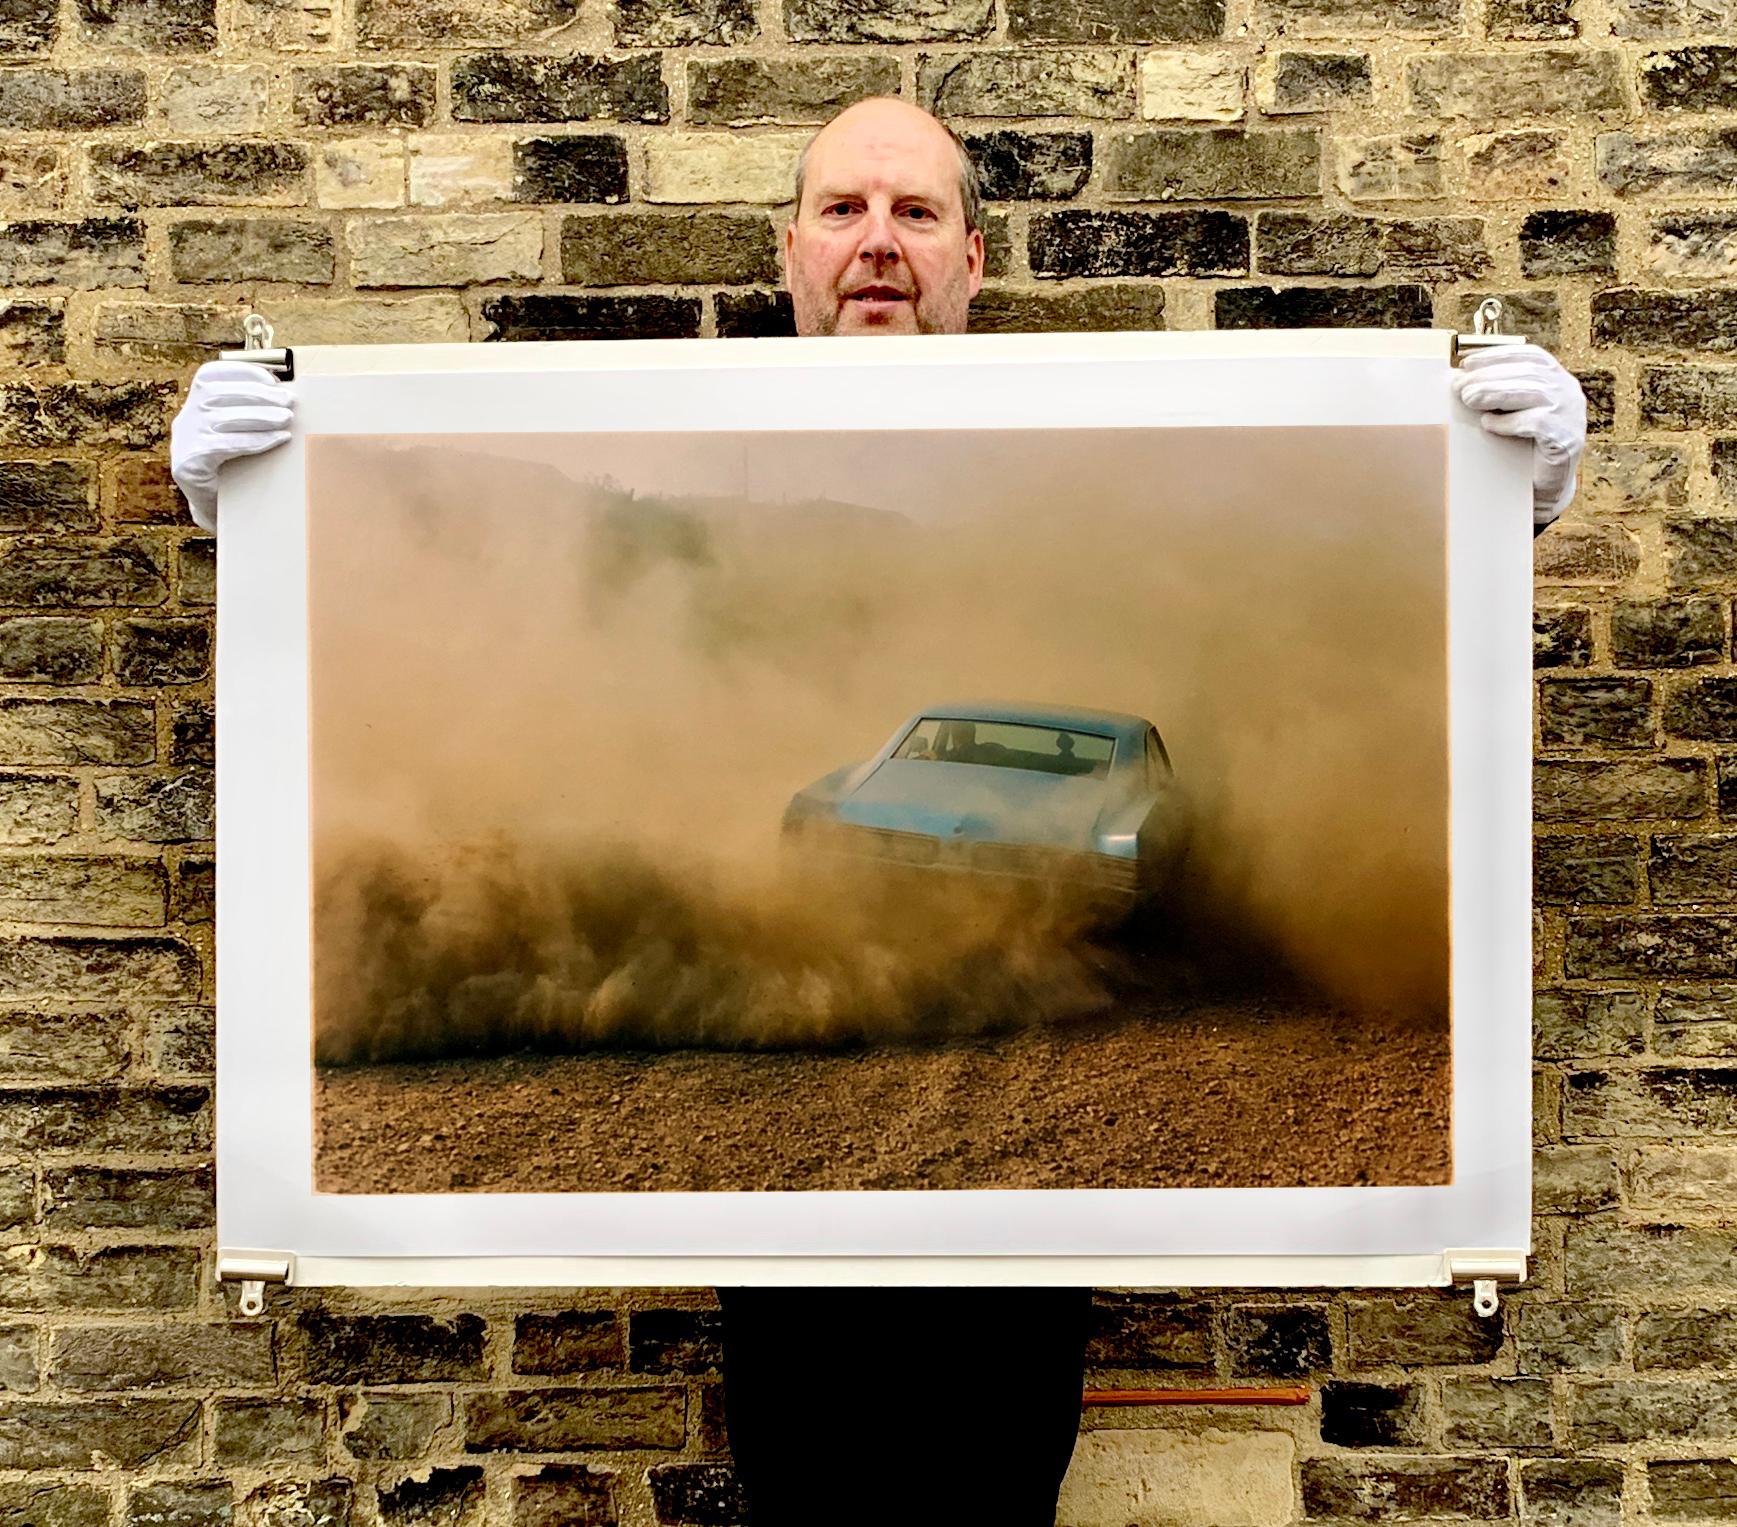 Buick in the Dust III, Hemsby, Norfolk - Car, color photography - Contemporary Print by Richard Heeps